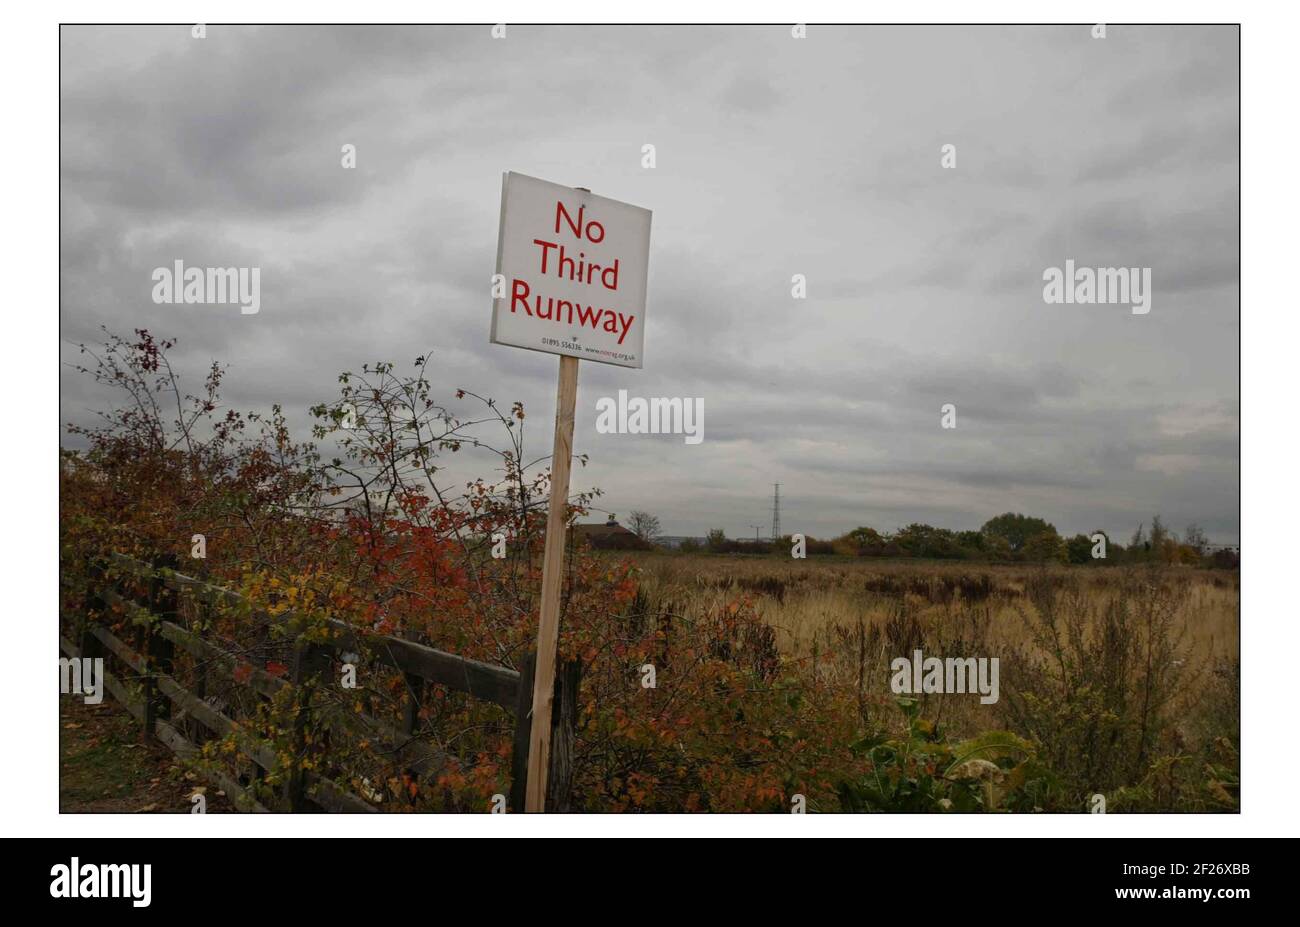 Third runway at Heathrow......The village of Sipson between the A4 and M4 roads on the border of Heathrow which is in the path of the proposed new runway.pic David Sandison 22/10/2003 Stock Photo